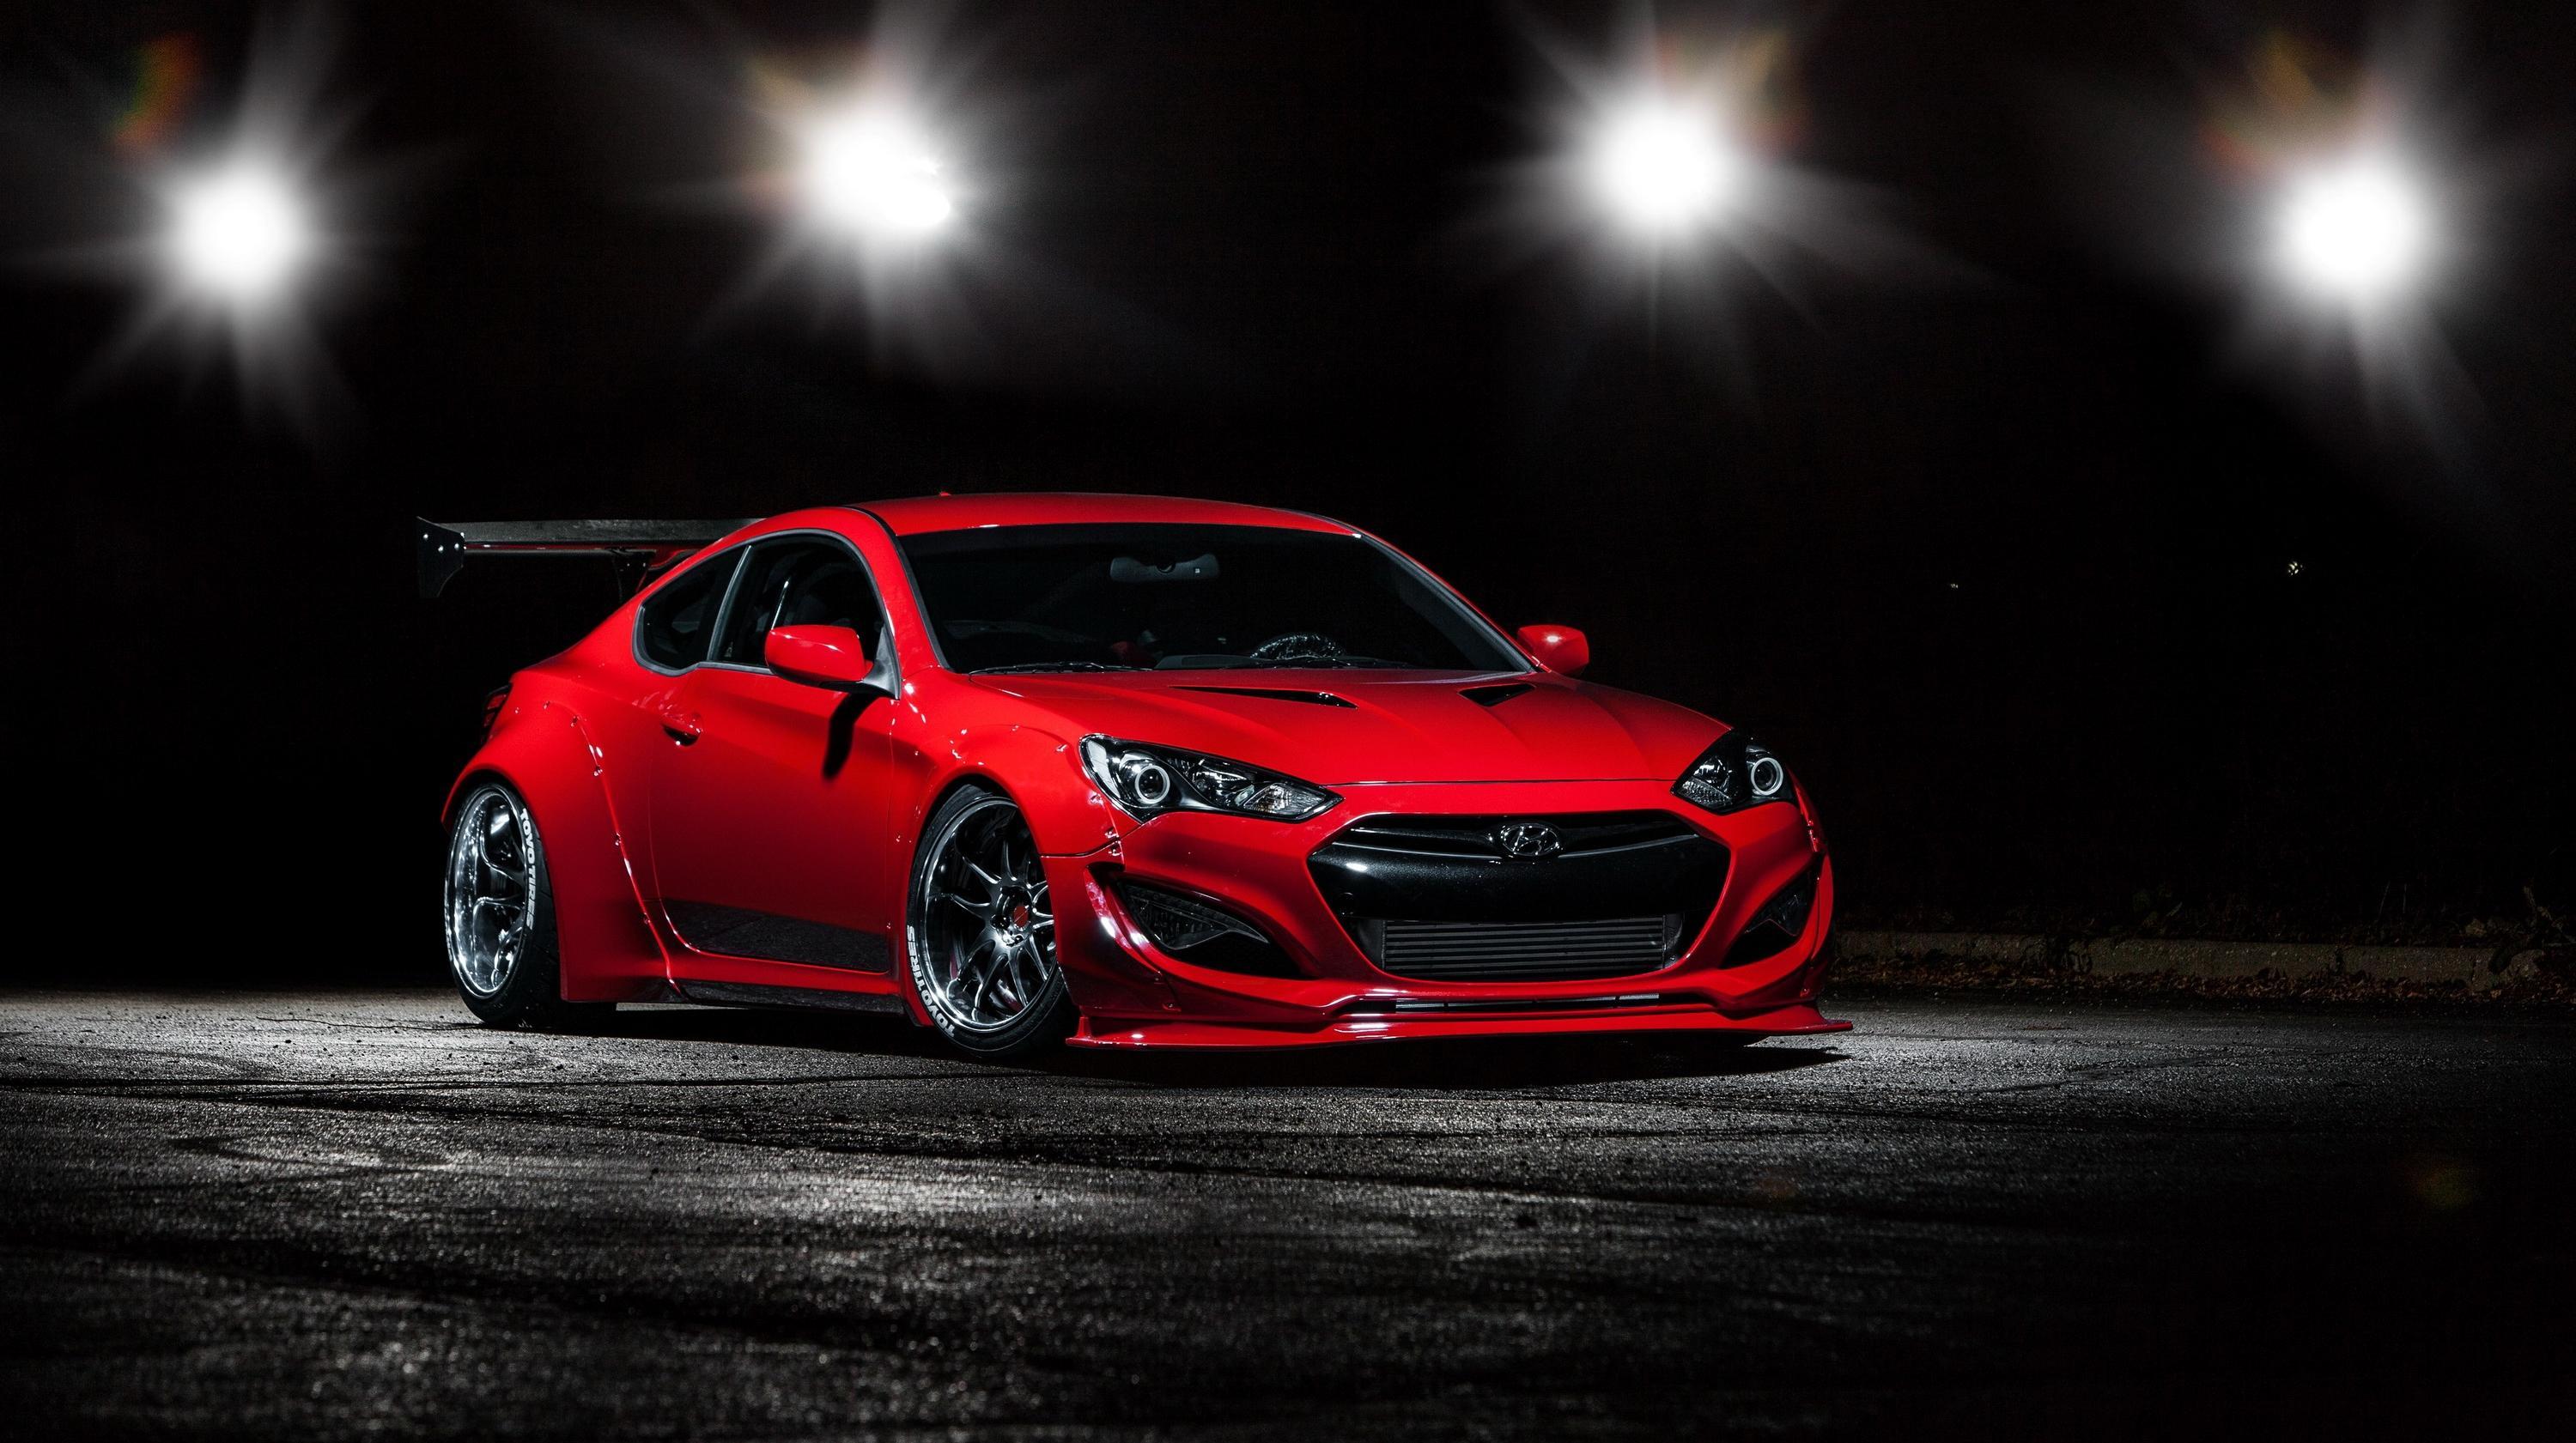 Hyundai Genesis Coupe By Blood Type Racing Picture, Photo